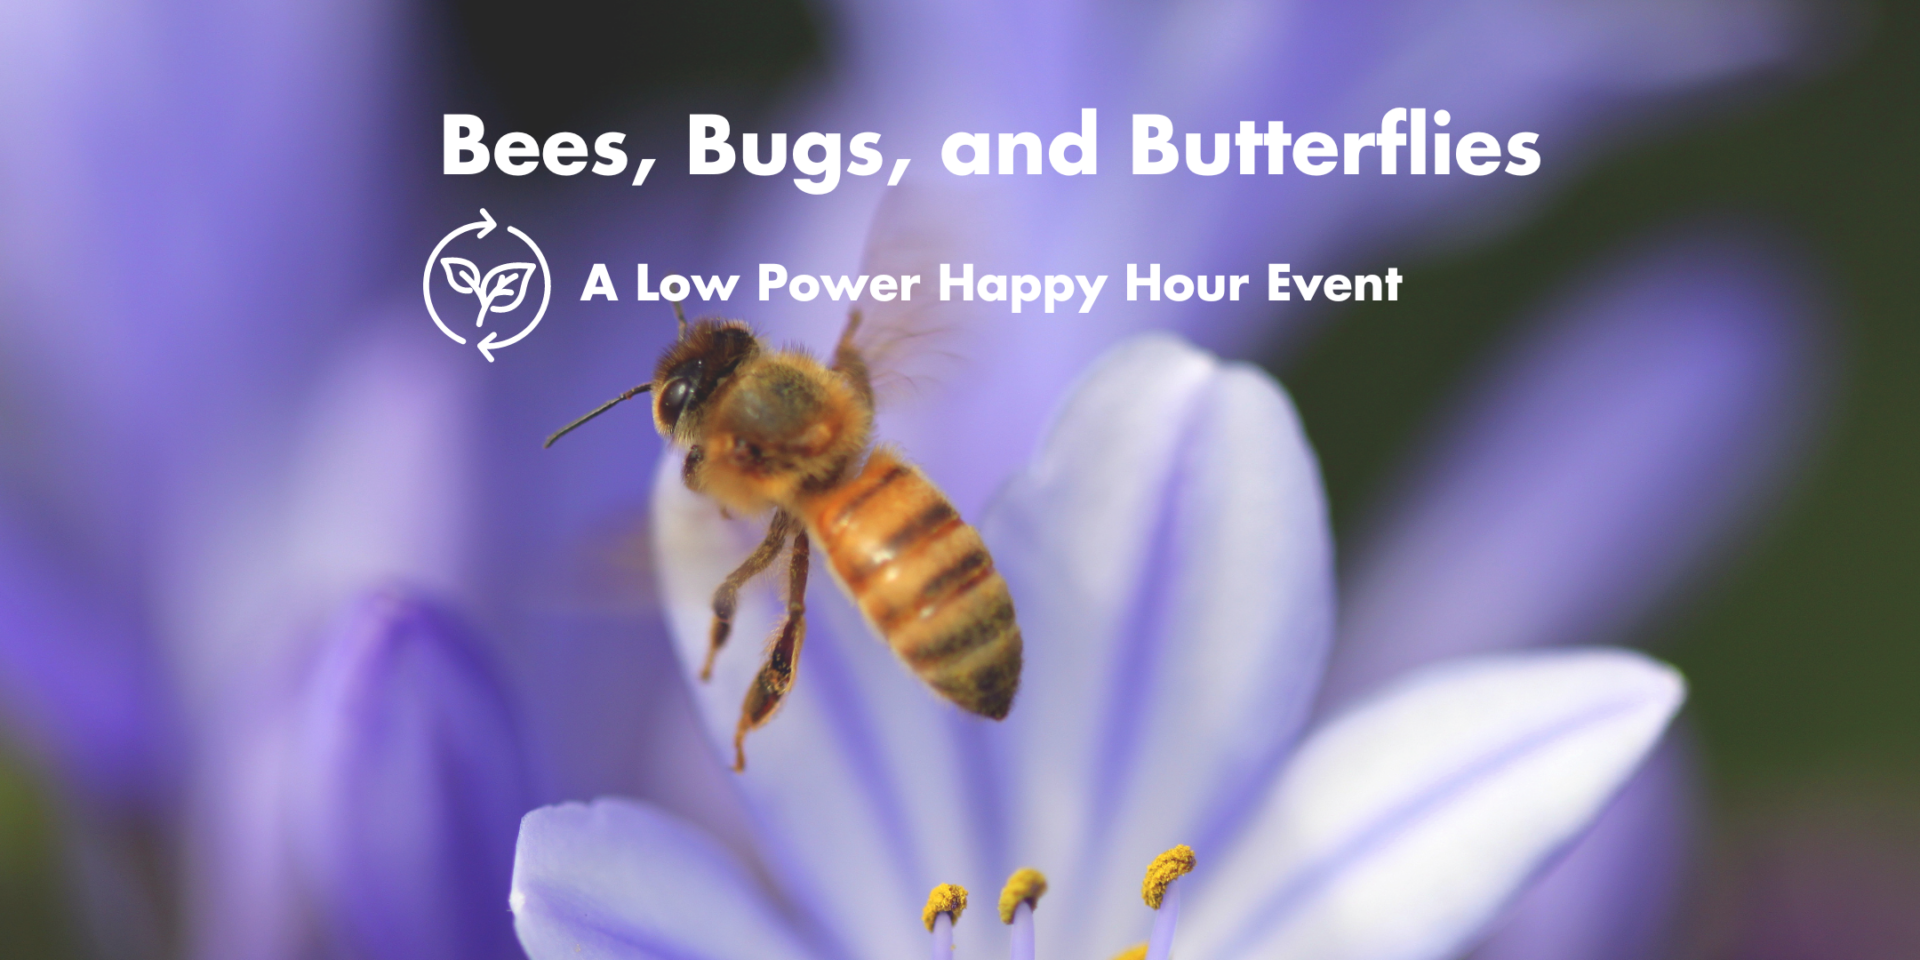 A black and yellow bee on a purple flower. The words Bees, Bugs, and Butterflies and A Low Power Happy Hour Event are centered over the image.